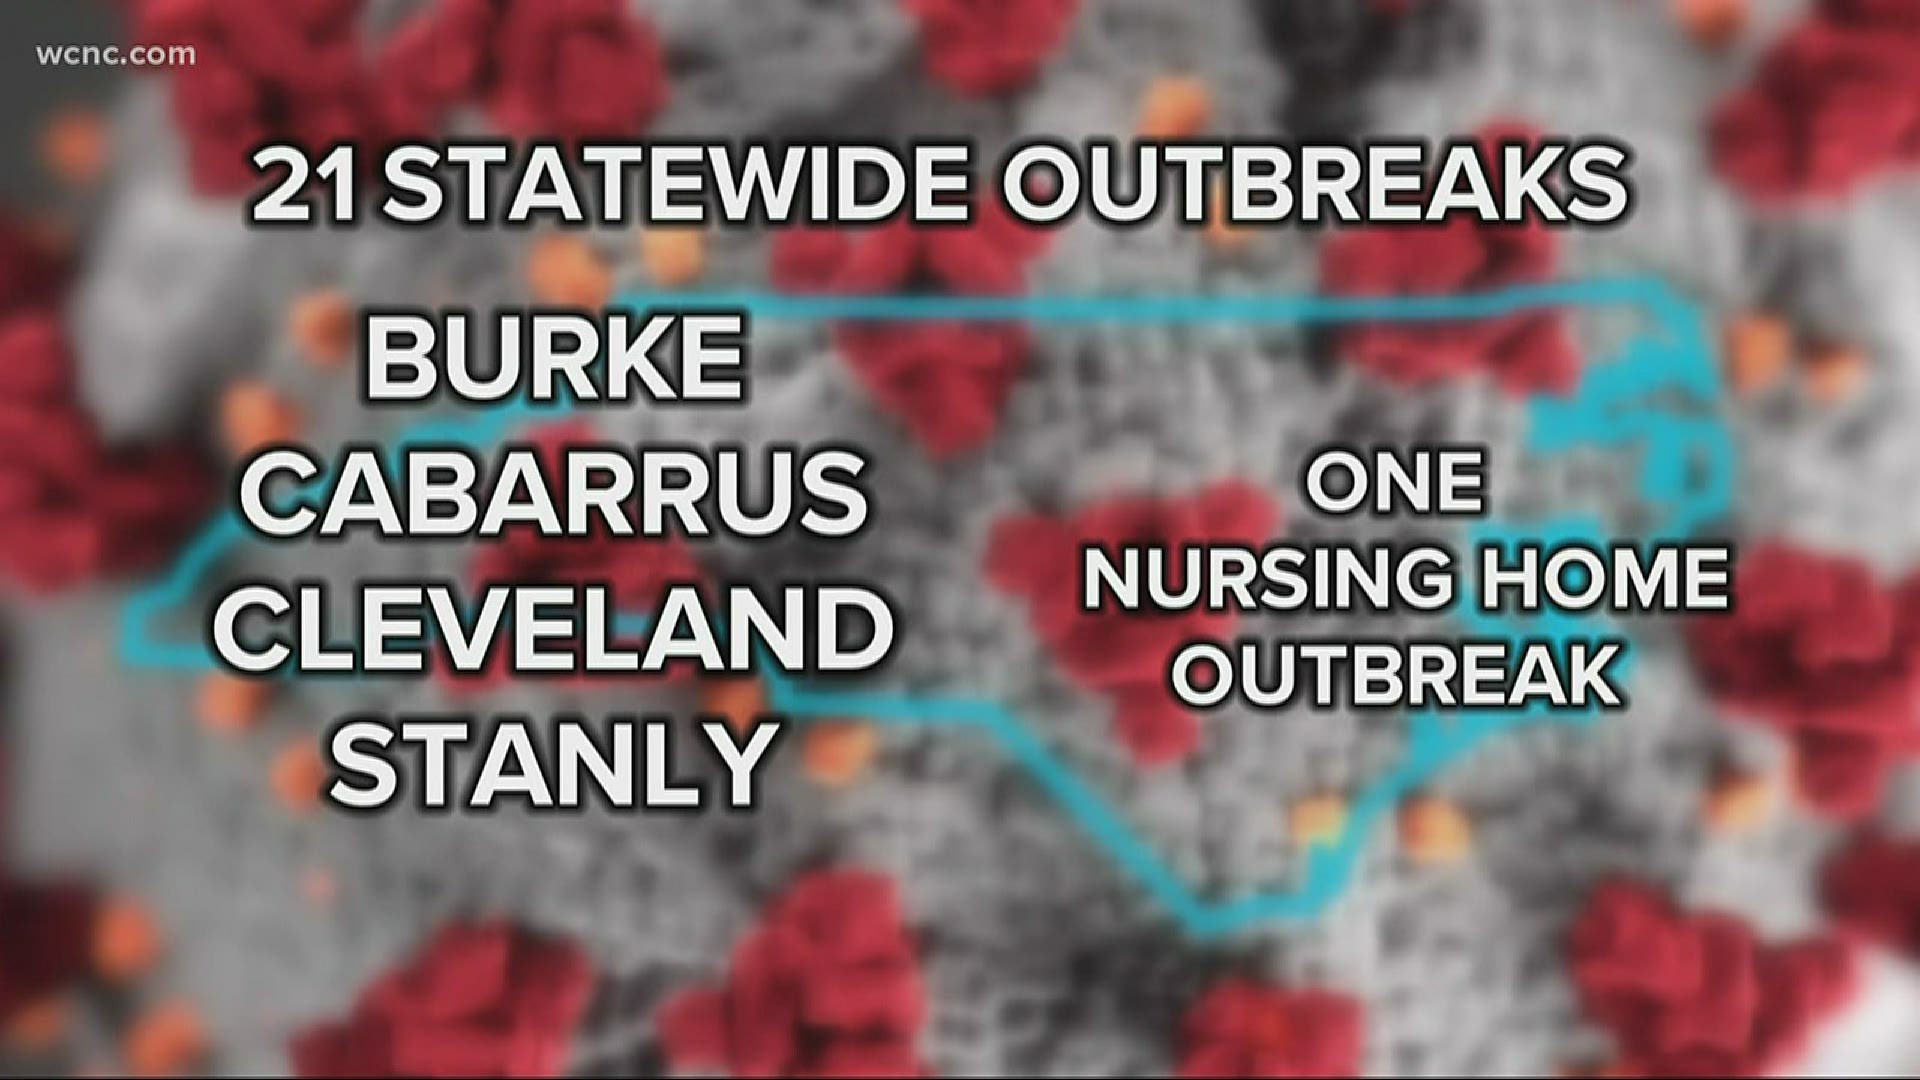 The United States saw its second-deadliest day of the COVID-19 outbreak this week, as nearly 2,000 Americans have died in the last two days.